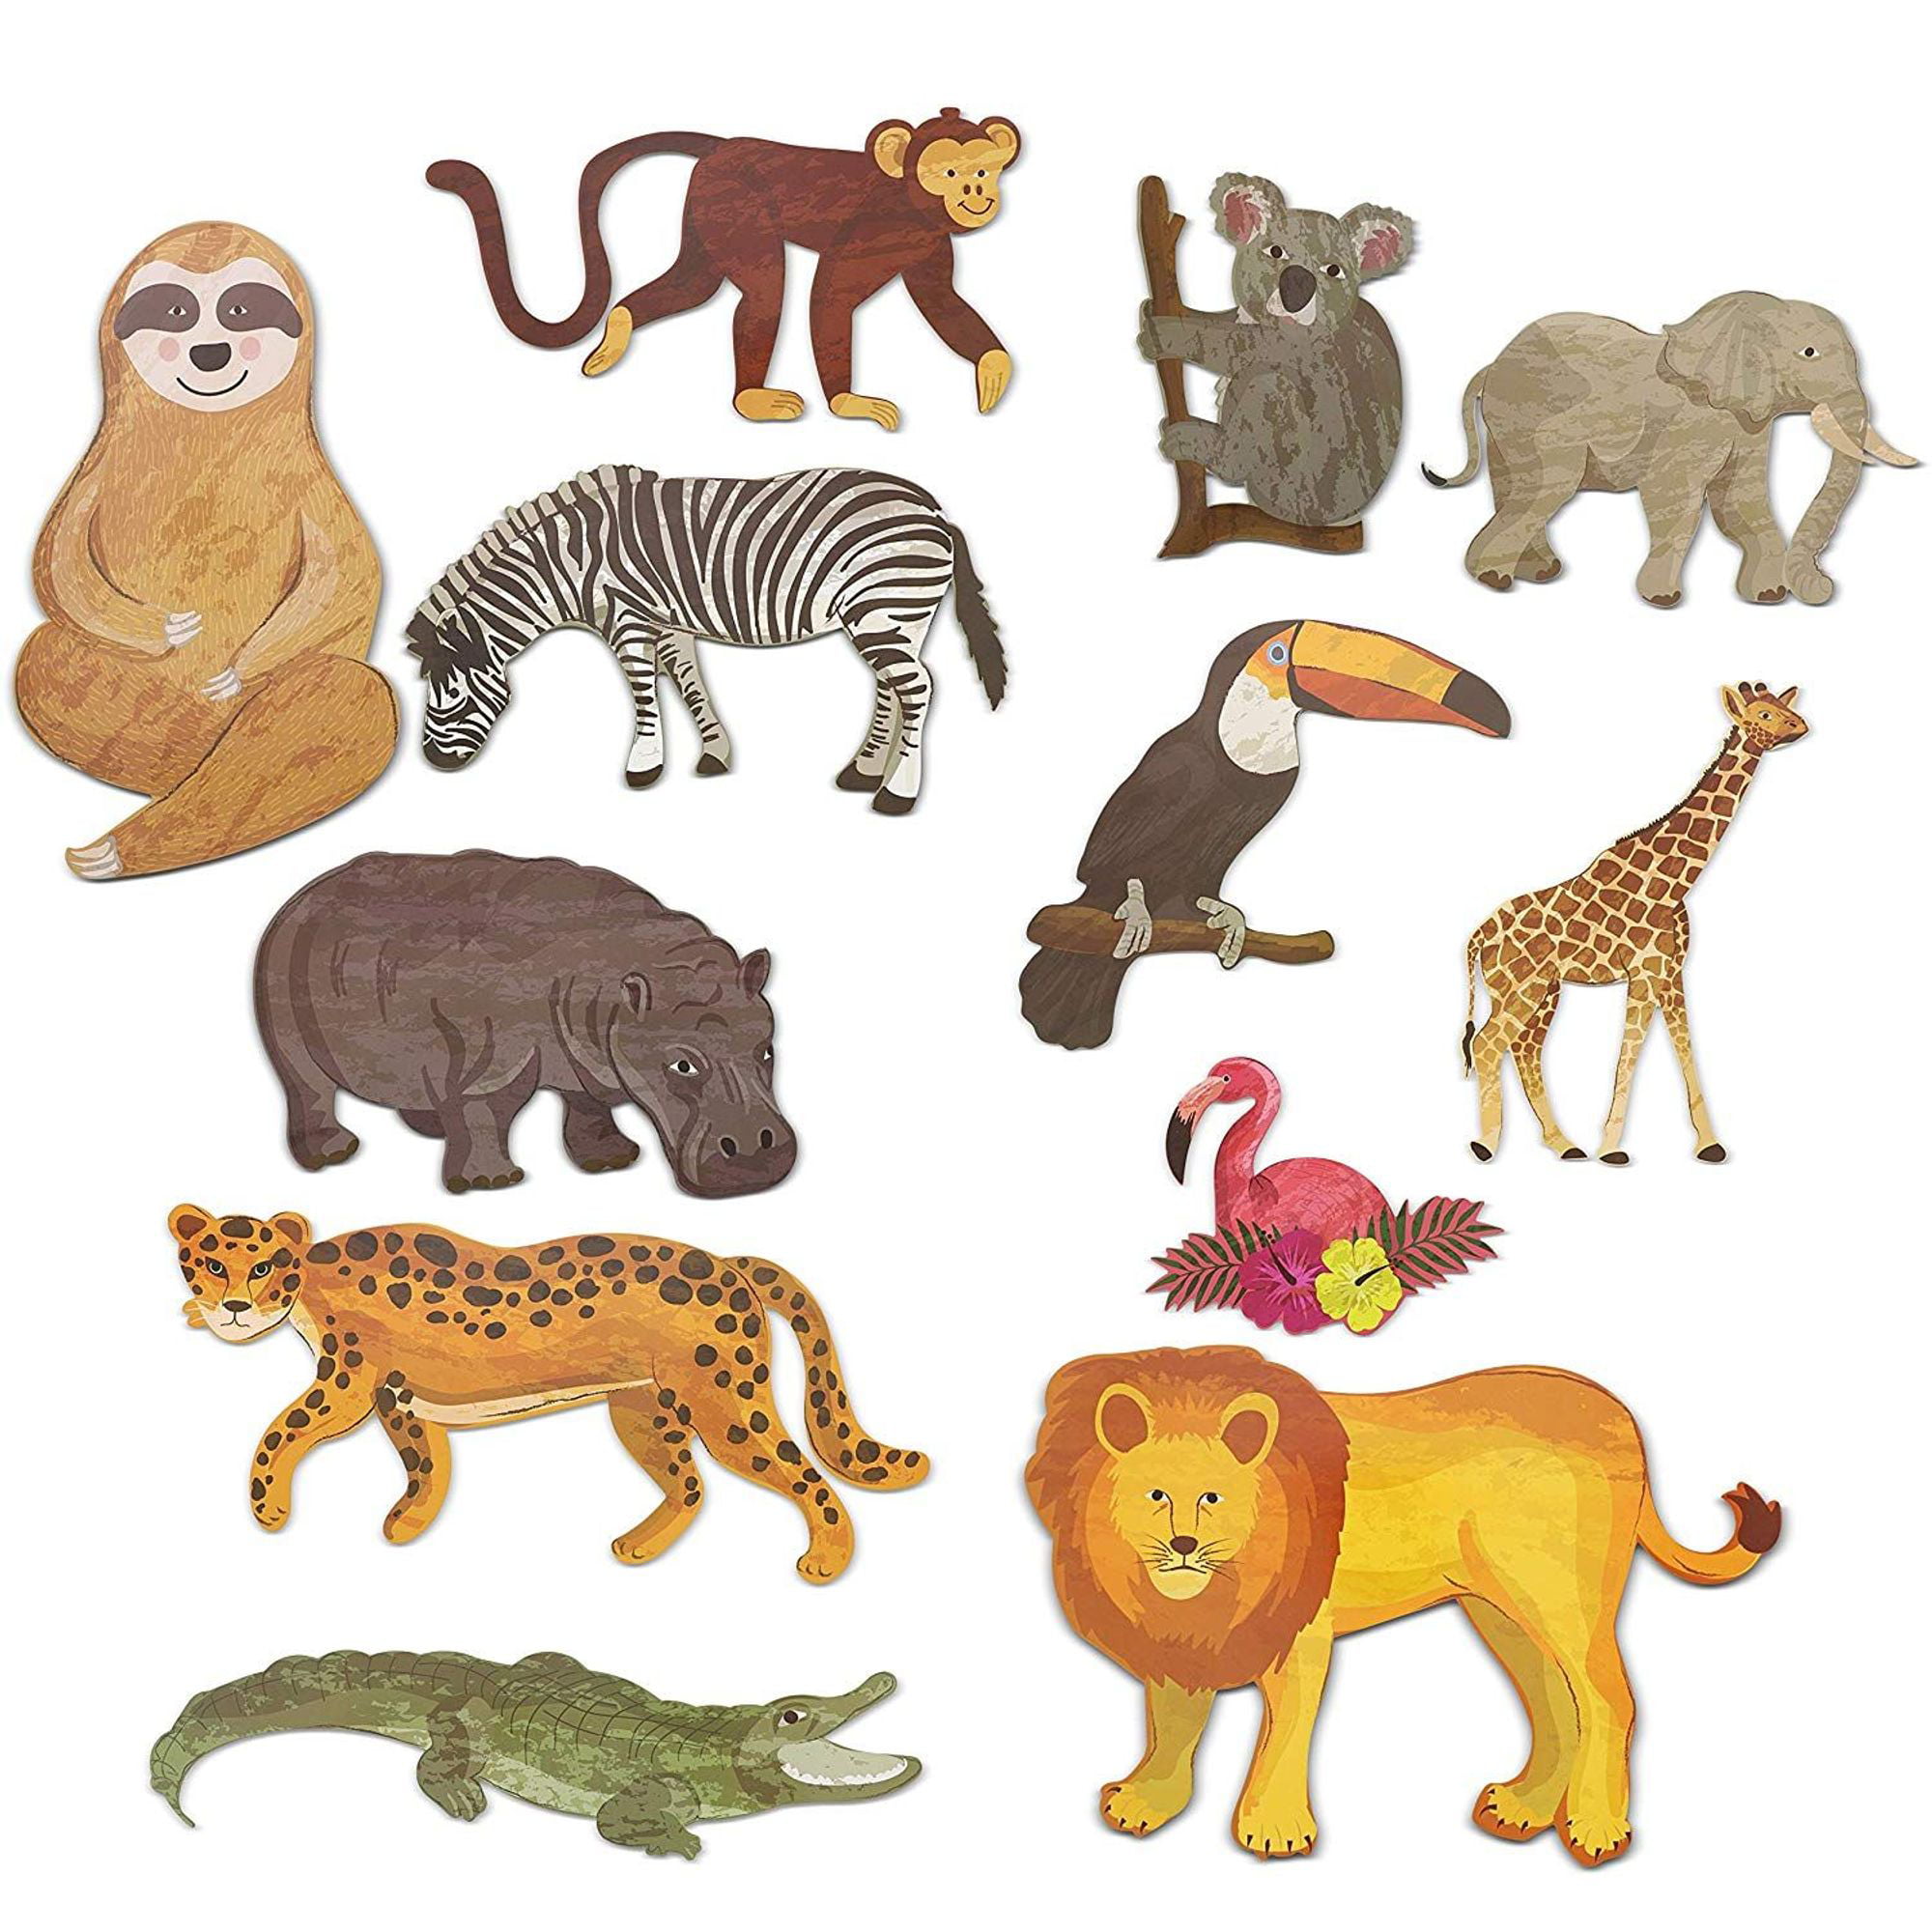 12 Count Jungle Animal Safari Paper Cutouts for Crafts, Home Party